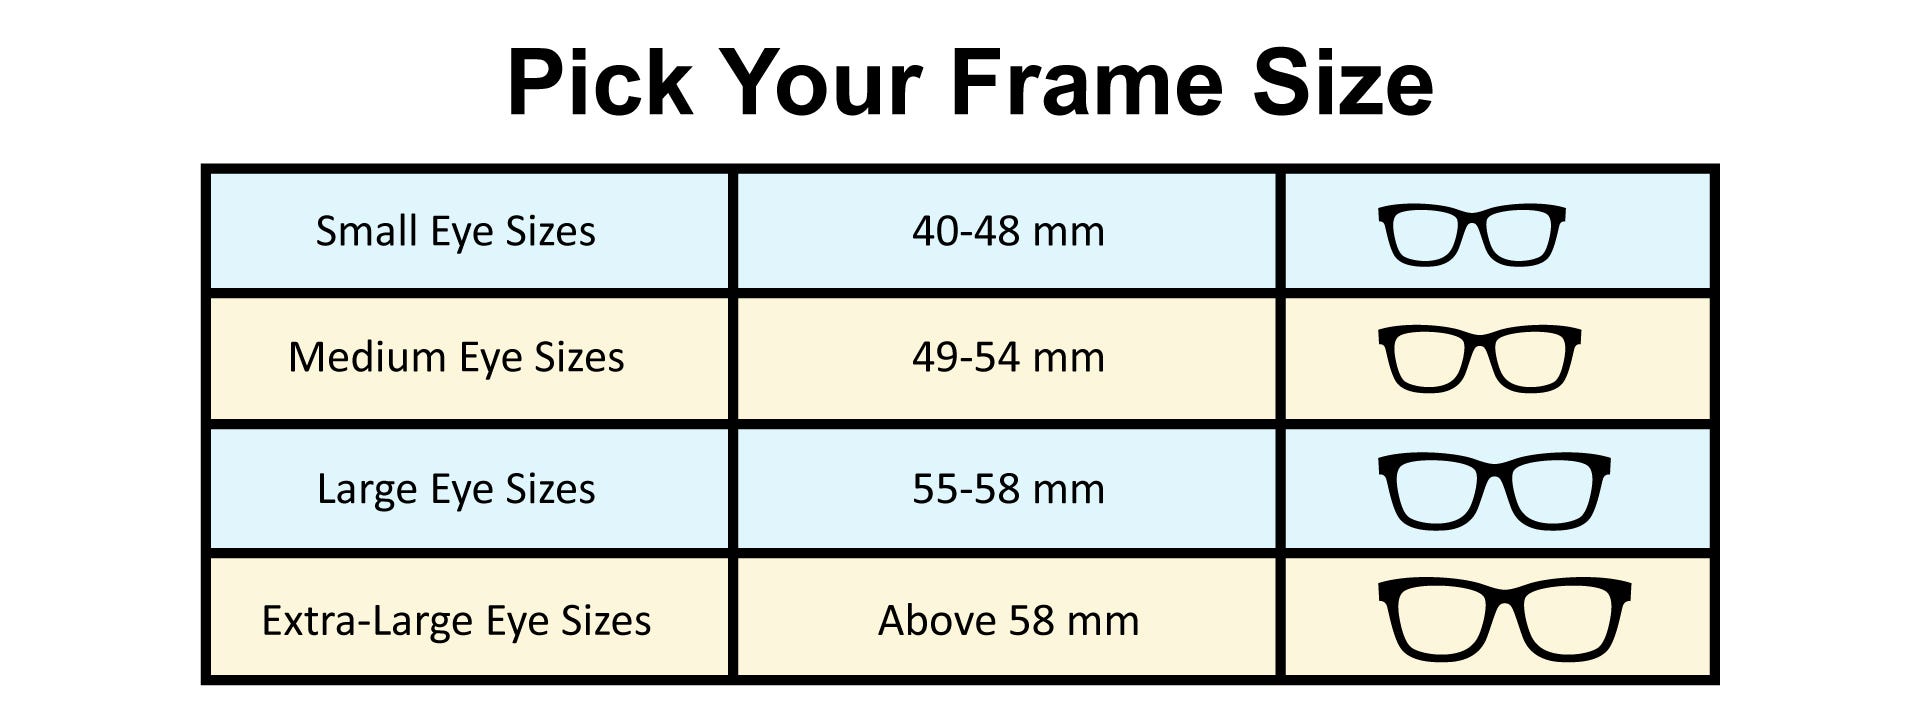 How To Determine The Right Size Of Eyeglasses